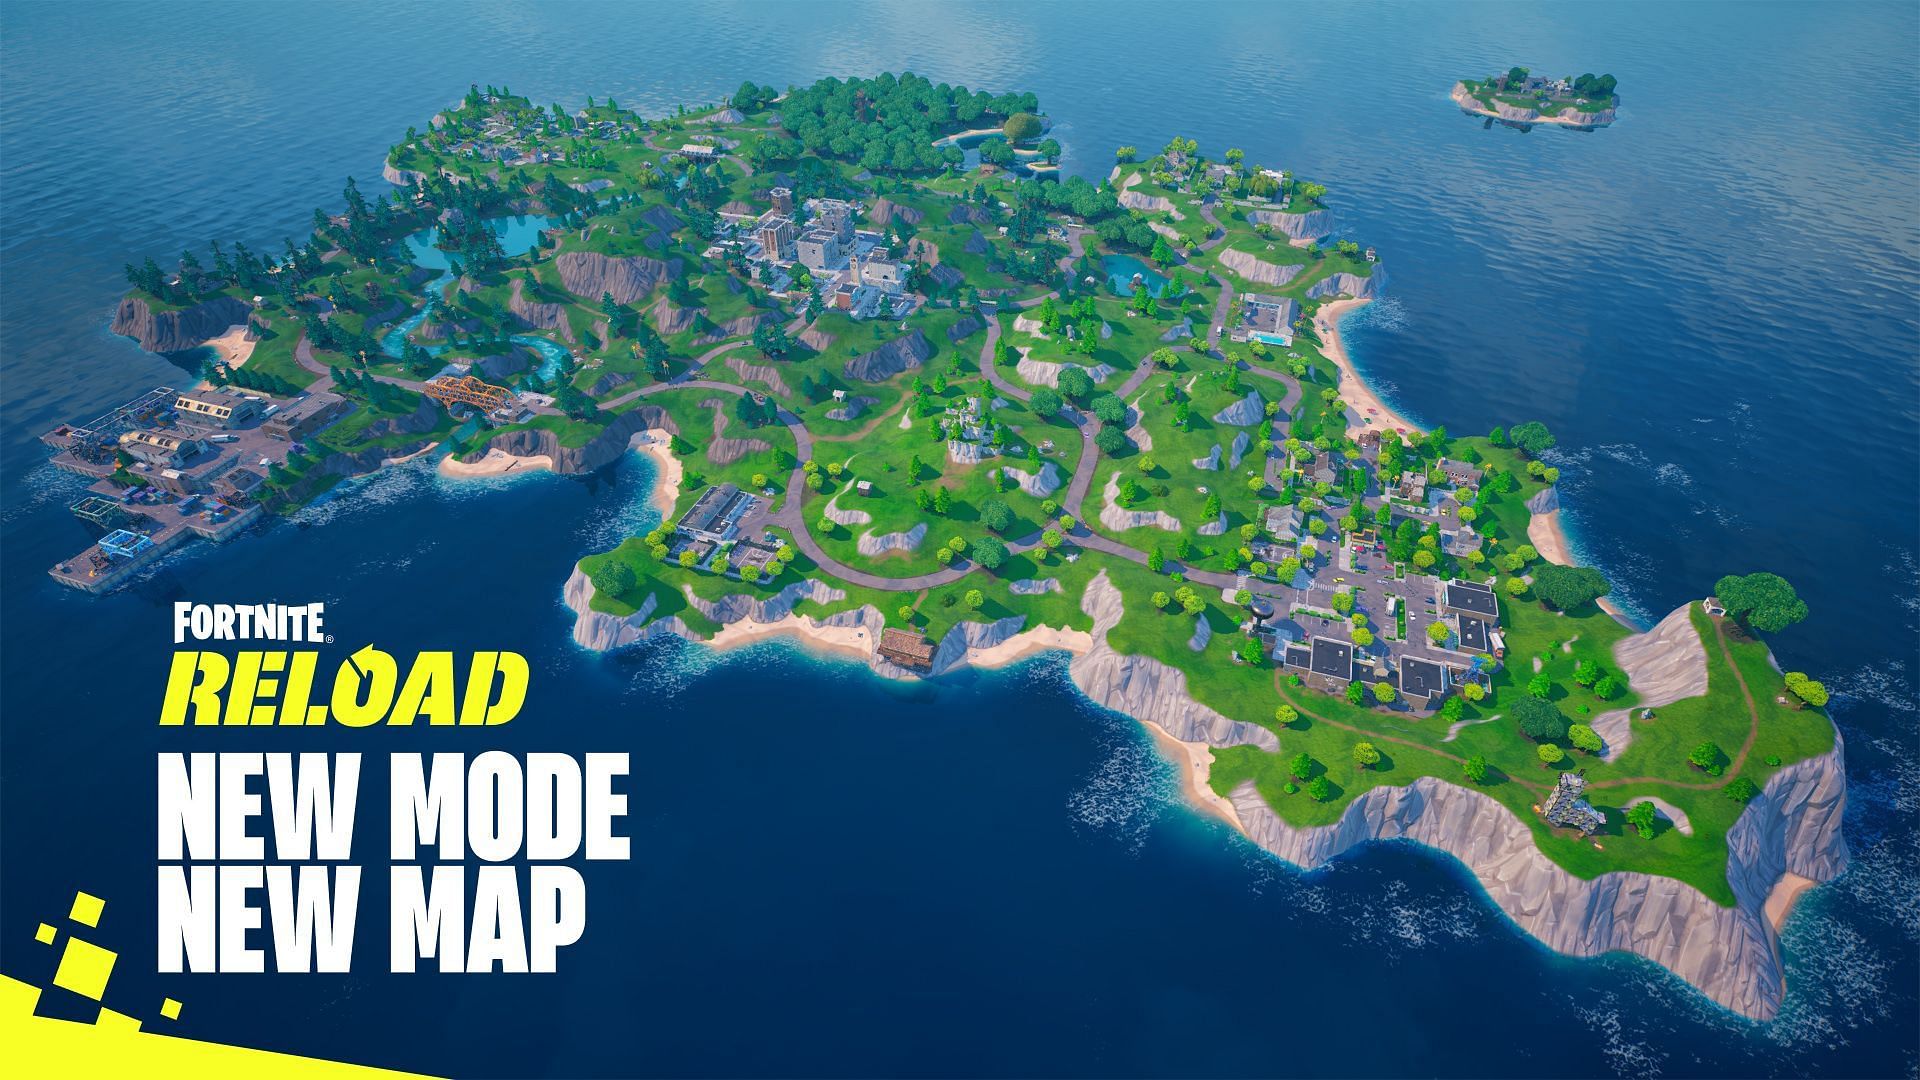 Fortnite Reload has been marketed as a fully realized new mode. (Image via Epic Games)